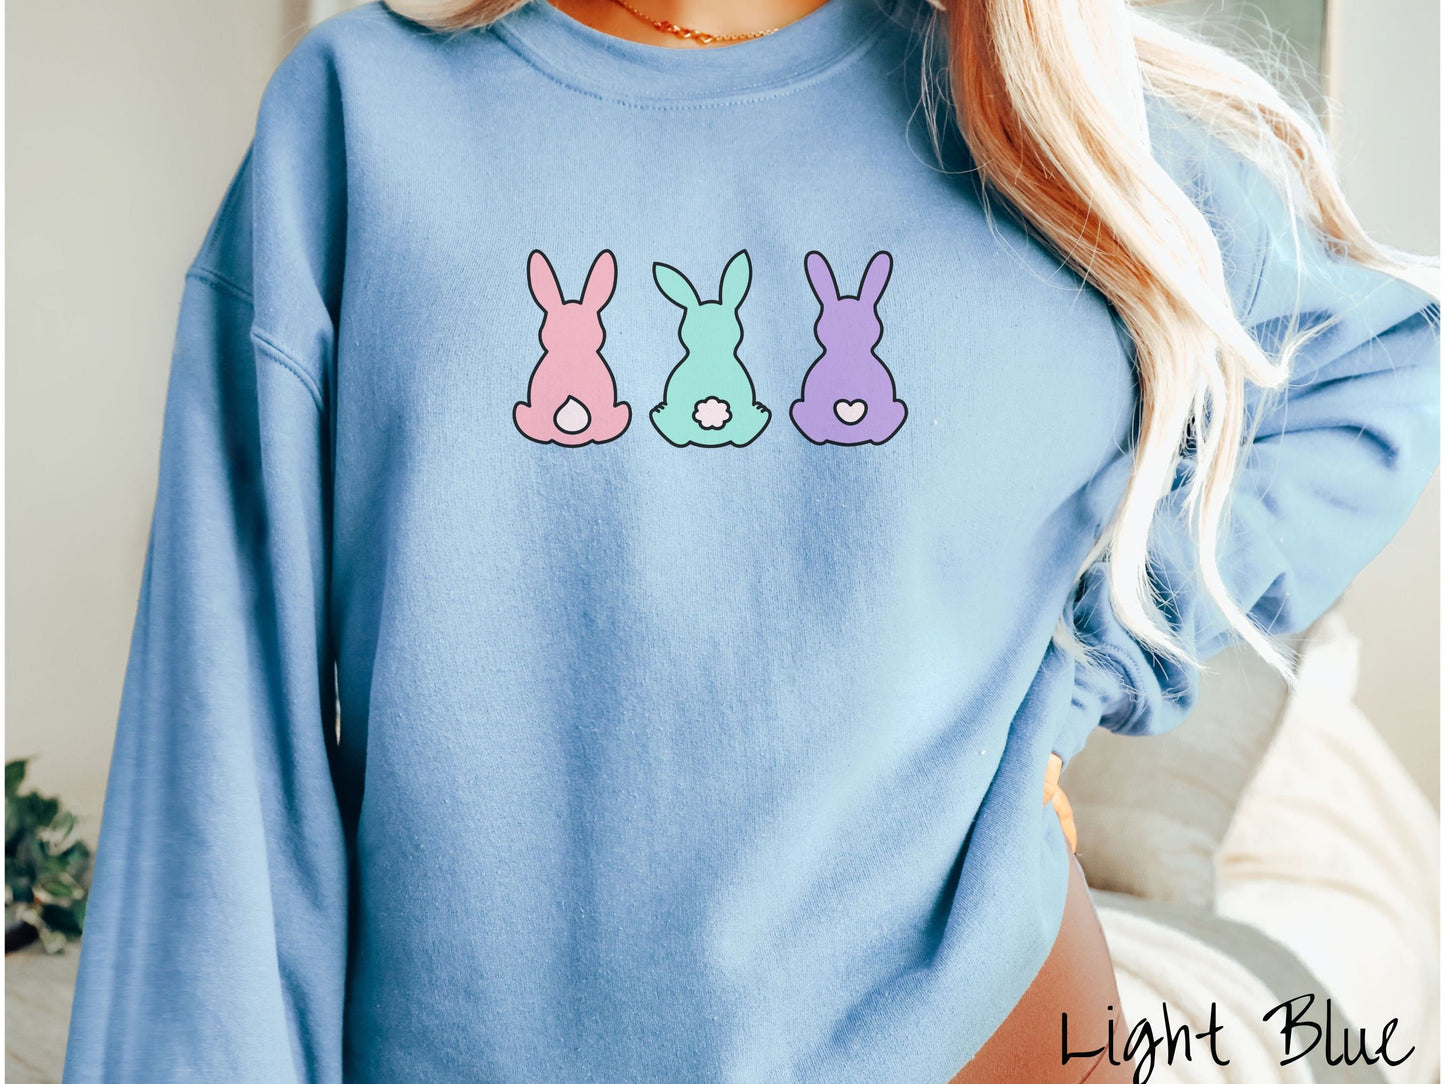 The Cute Easter Bunny Butts Sweatshirt, Gift this Sweater to your Homies Who Got your Back!